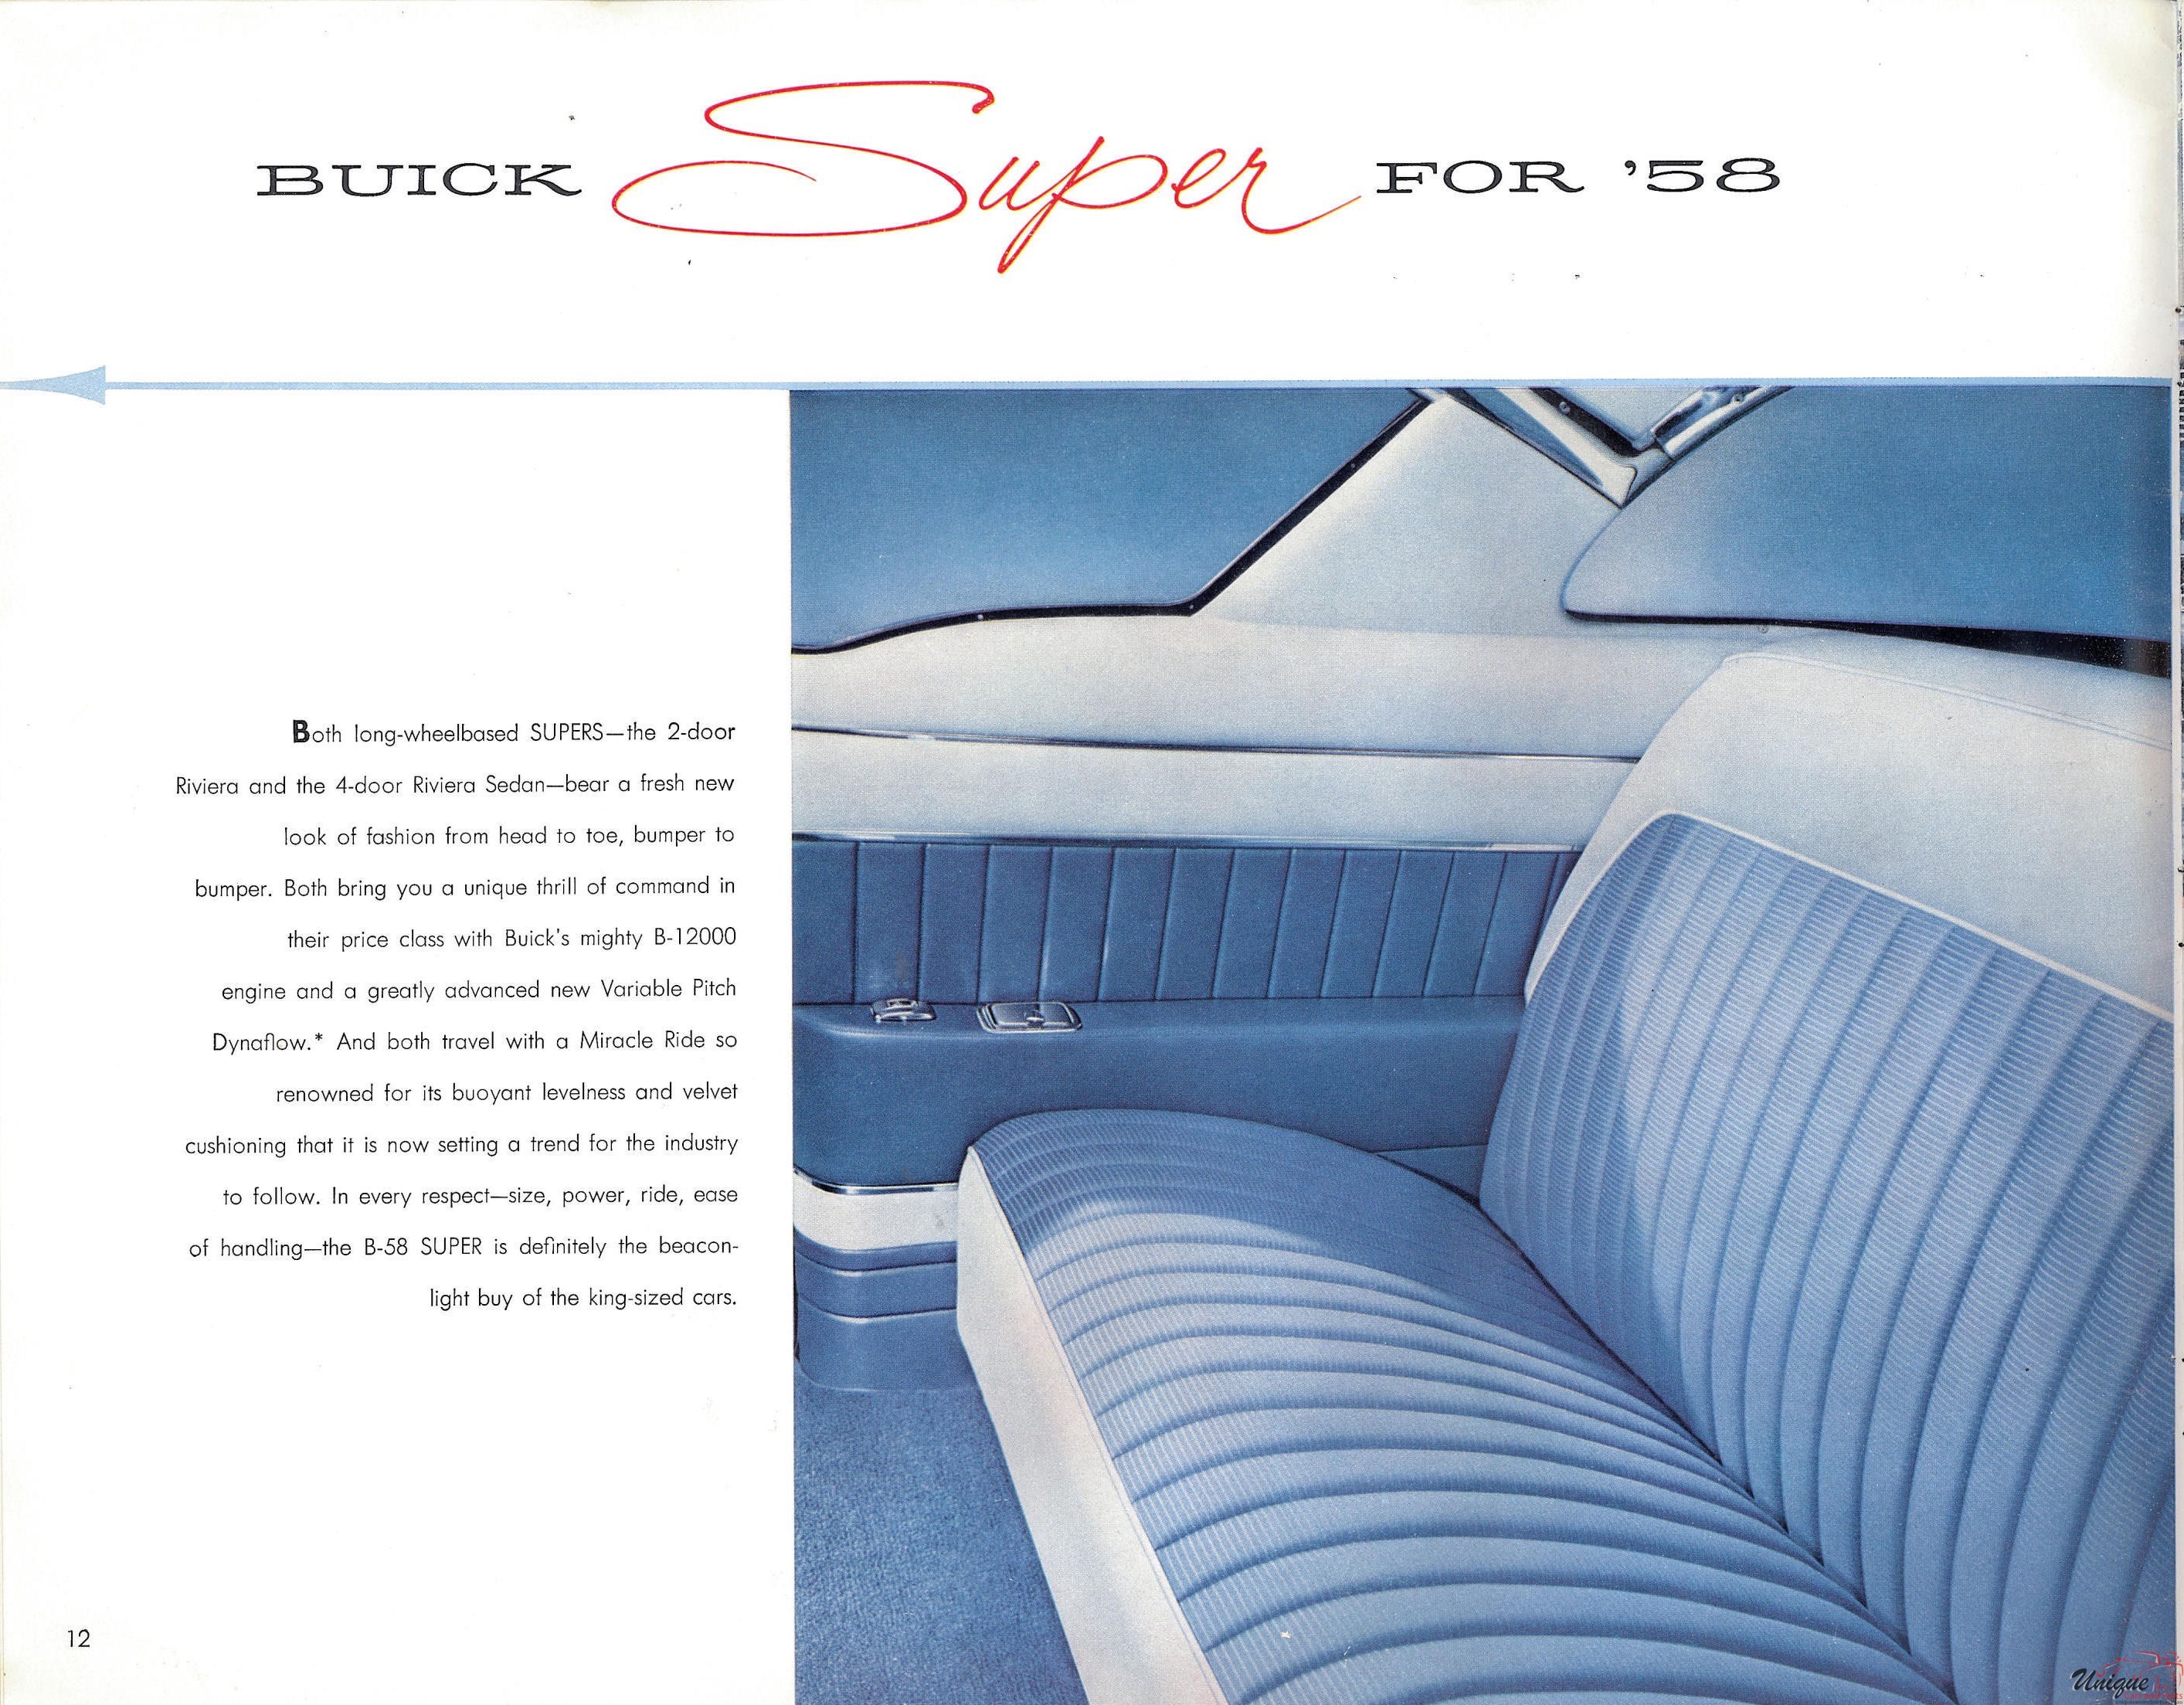 1958 Buick Brochure Page 18